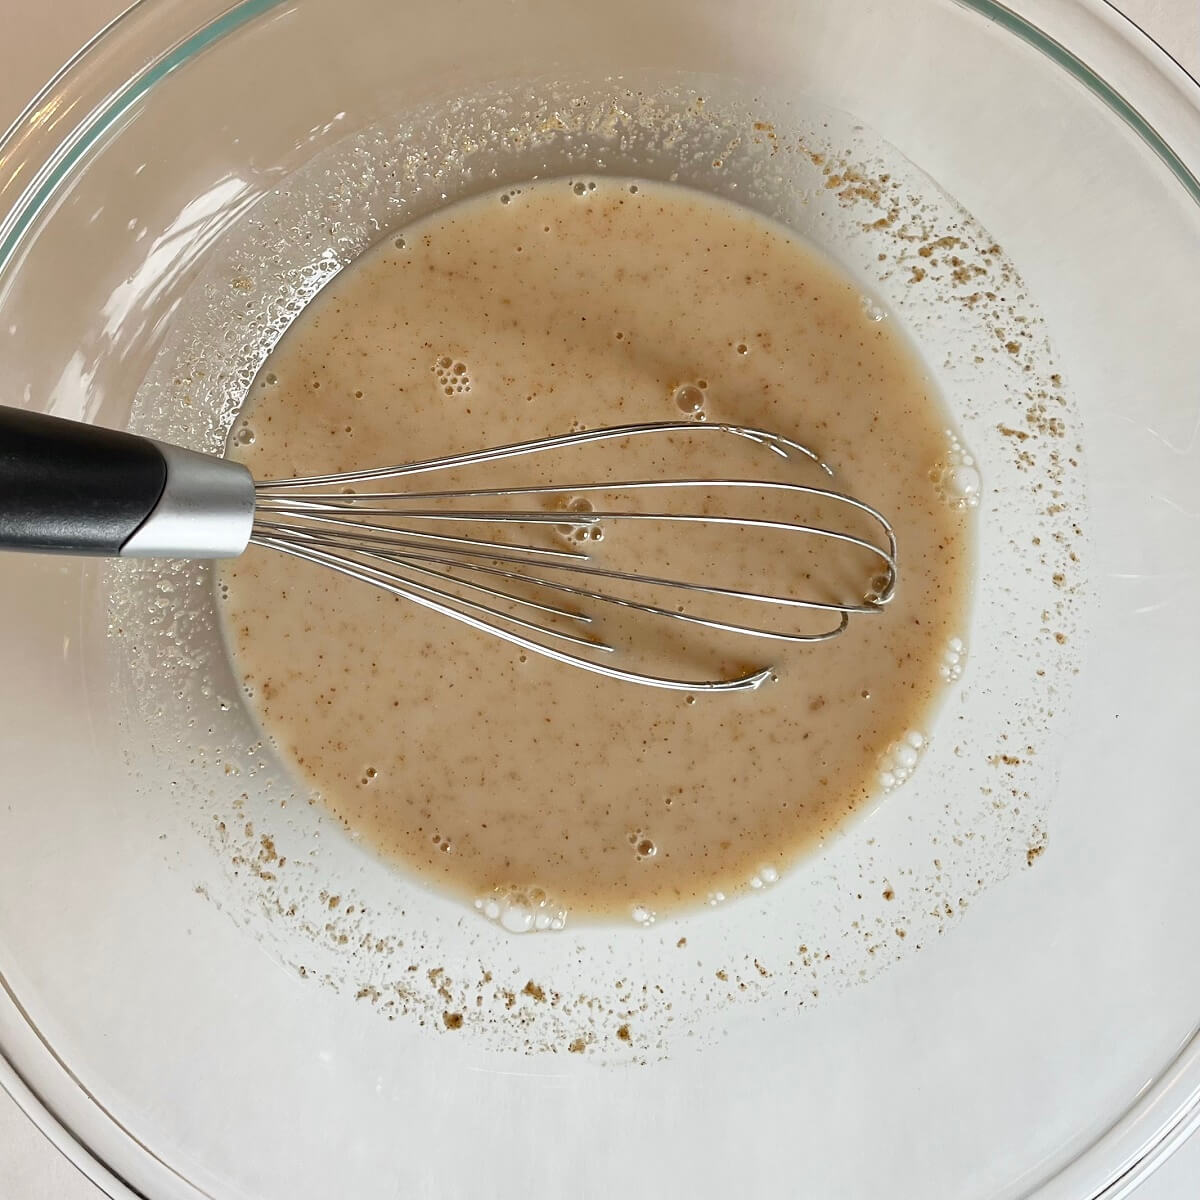 Wet ingredients for oat pancakes in a glass mixing bowl.